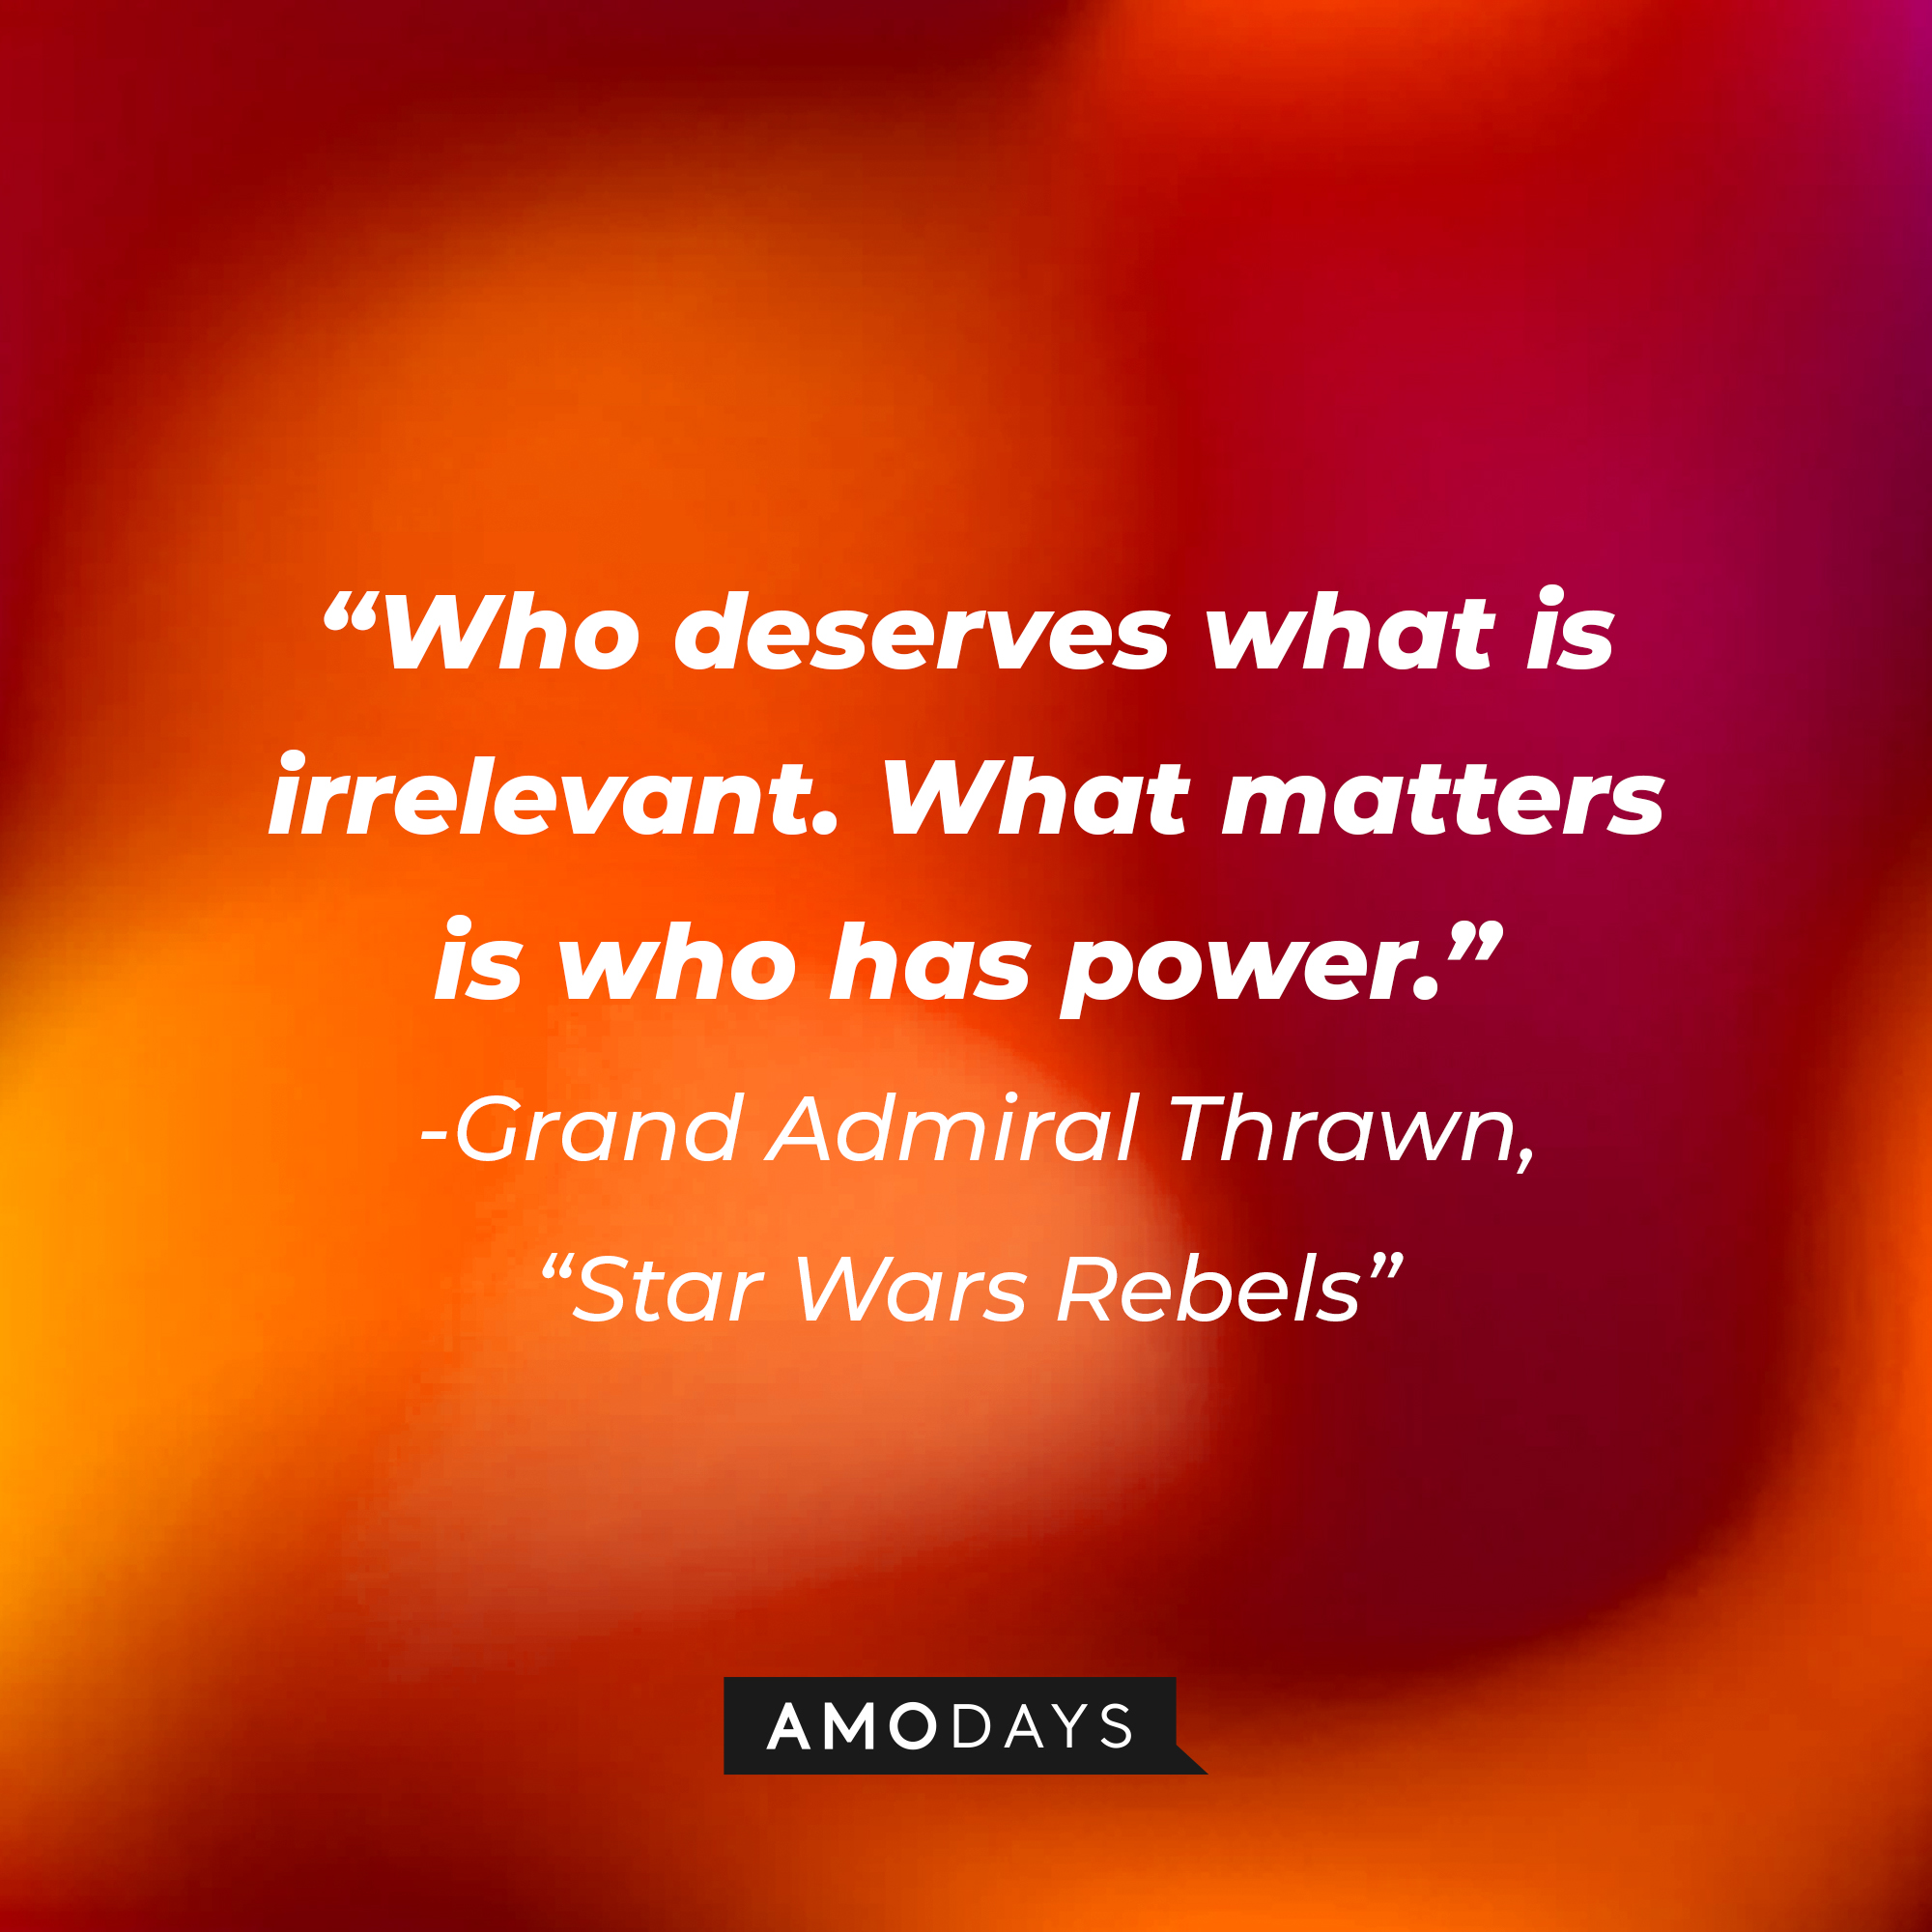 Grand Admiral Thrawn's quote: "Who deserves what is irrelevant. What matters is who has power." | Source: AmoDays